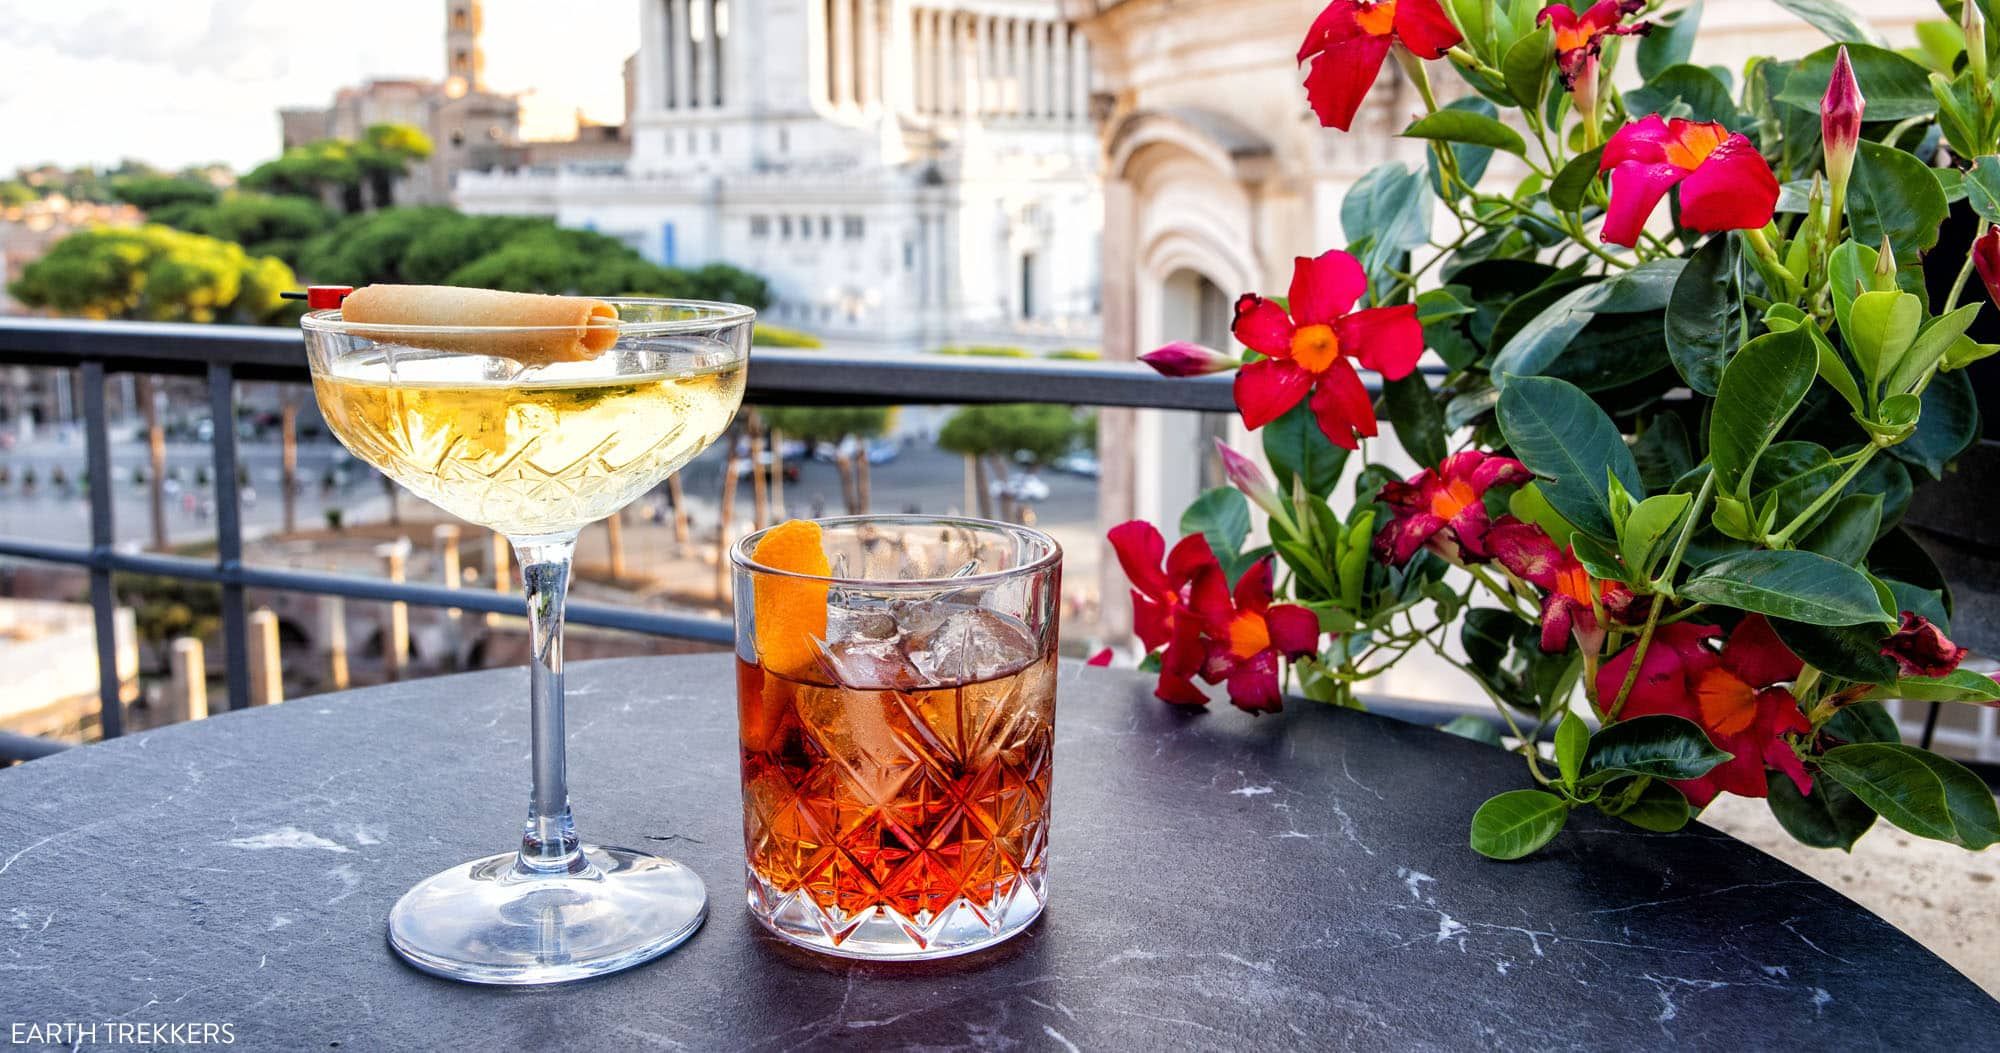 Featured image for “7 Best Rooftop Bars in Rome (Plus Practical Tips & Photos)”